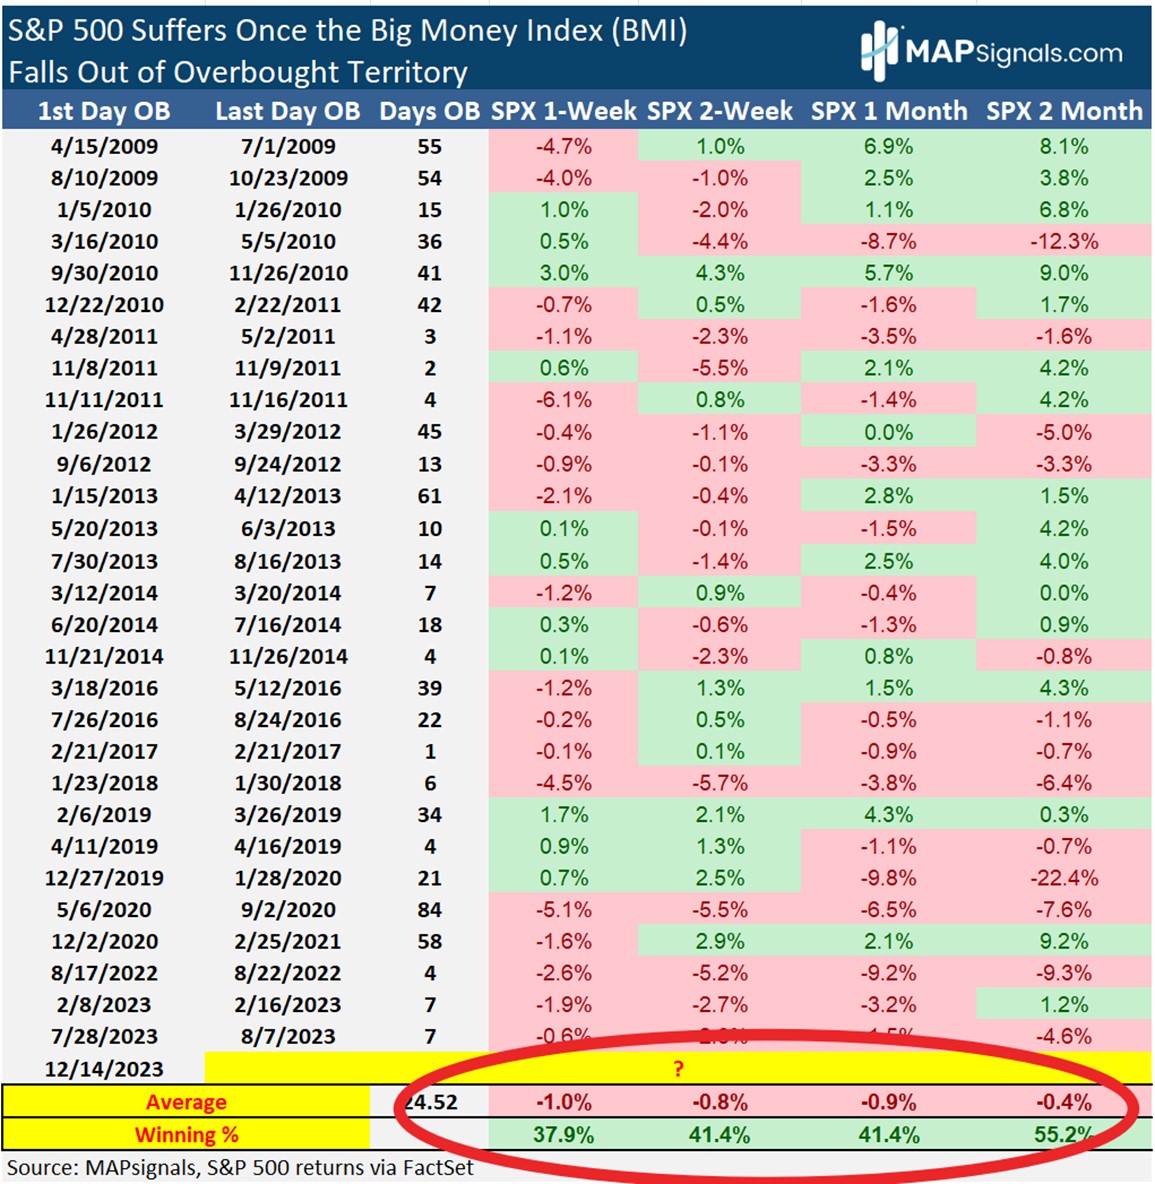 S&P 500 Suffers Once the Big Money Index (BMI) falls out of Overbought Territory | MAPsignals